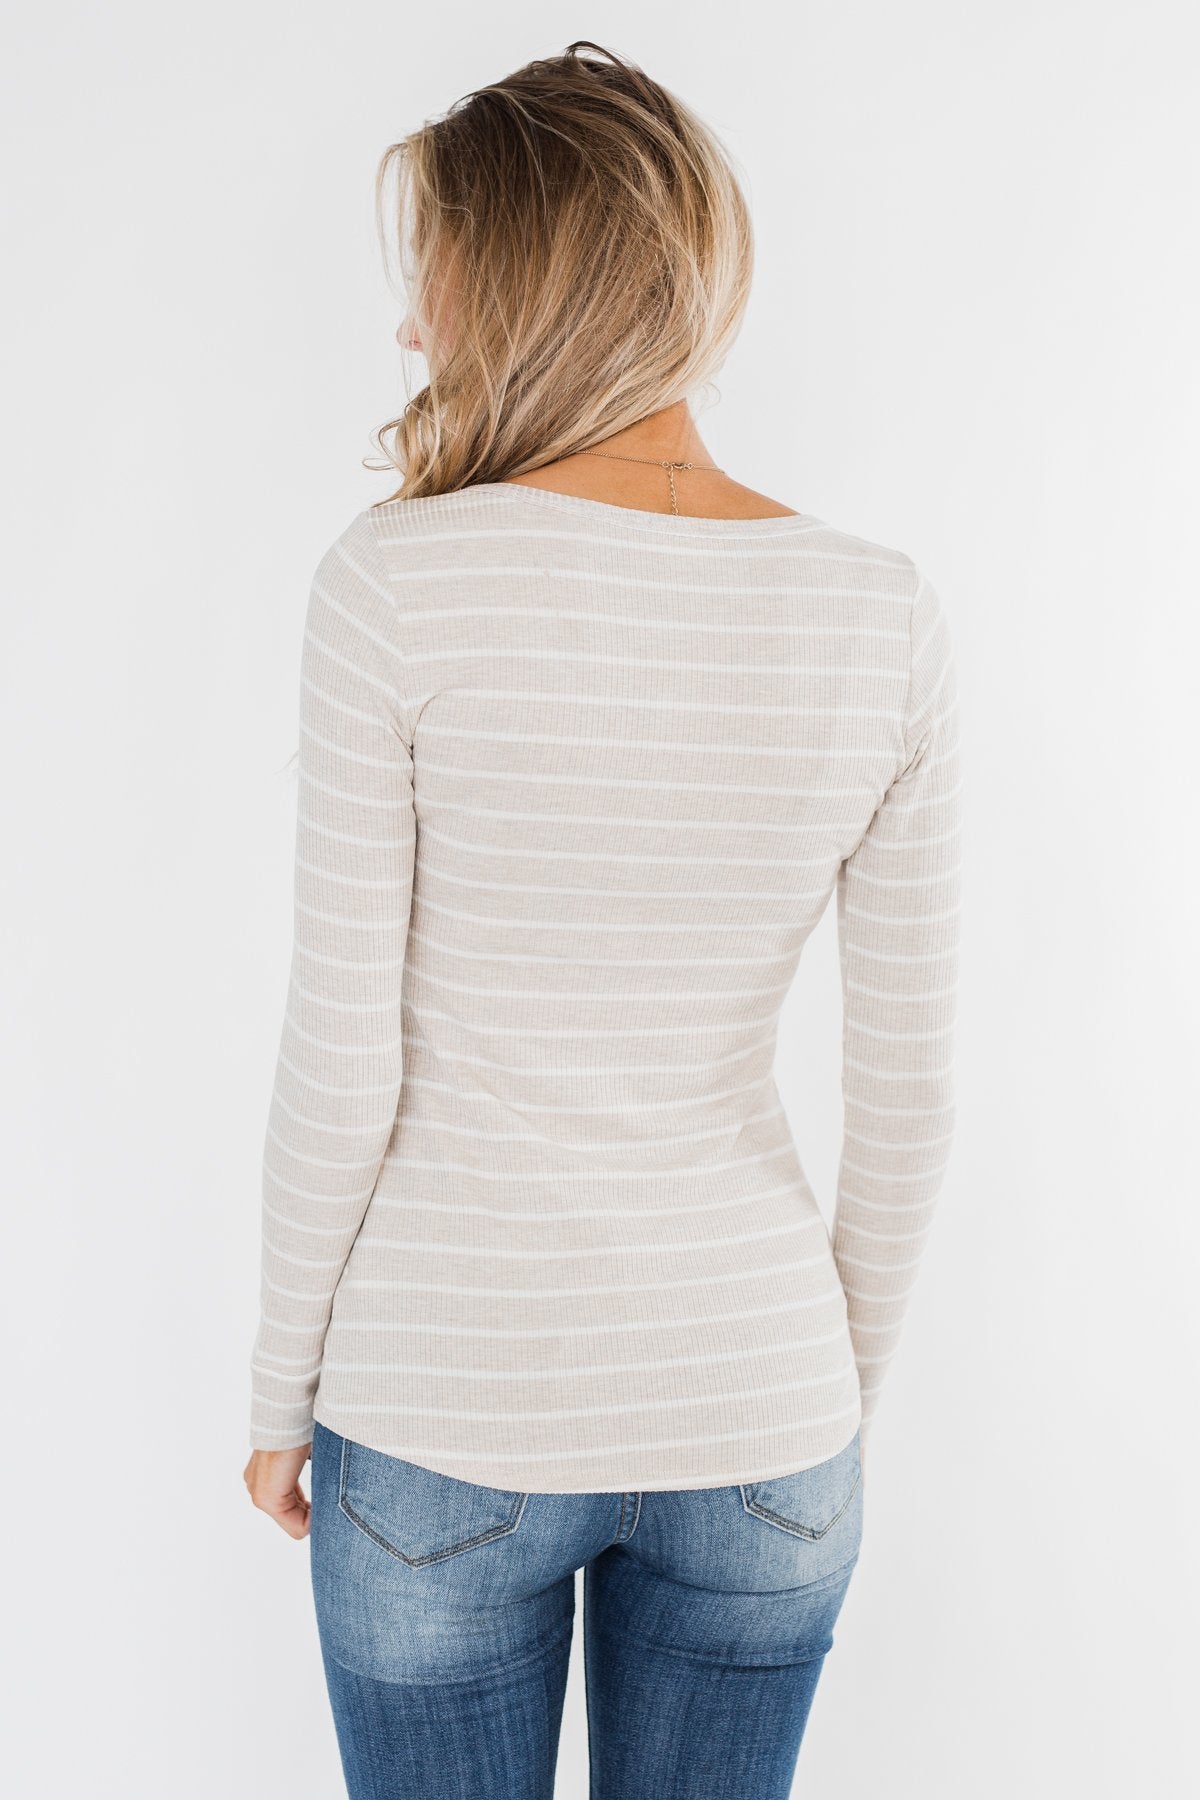 Essential 5-Button Henley Top- Heathered Oatmeal & Ivory